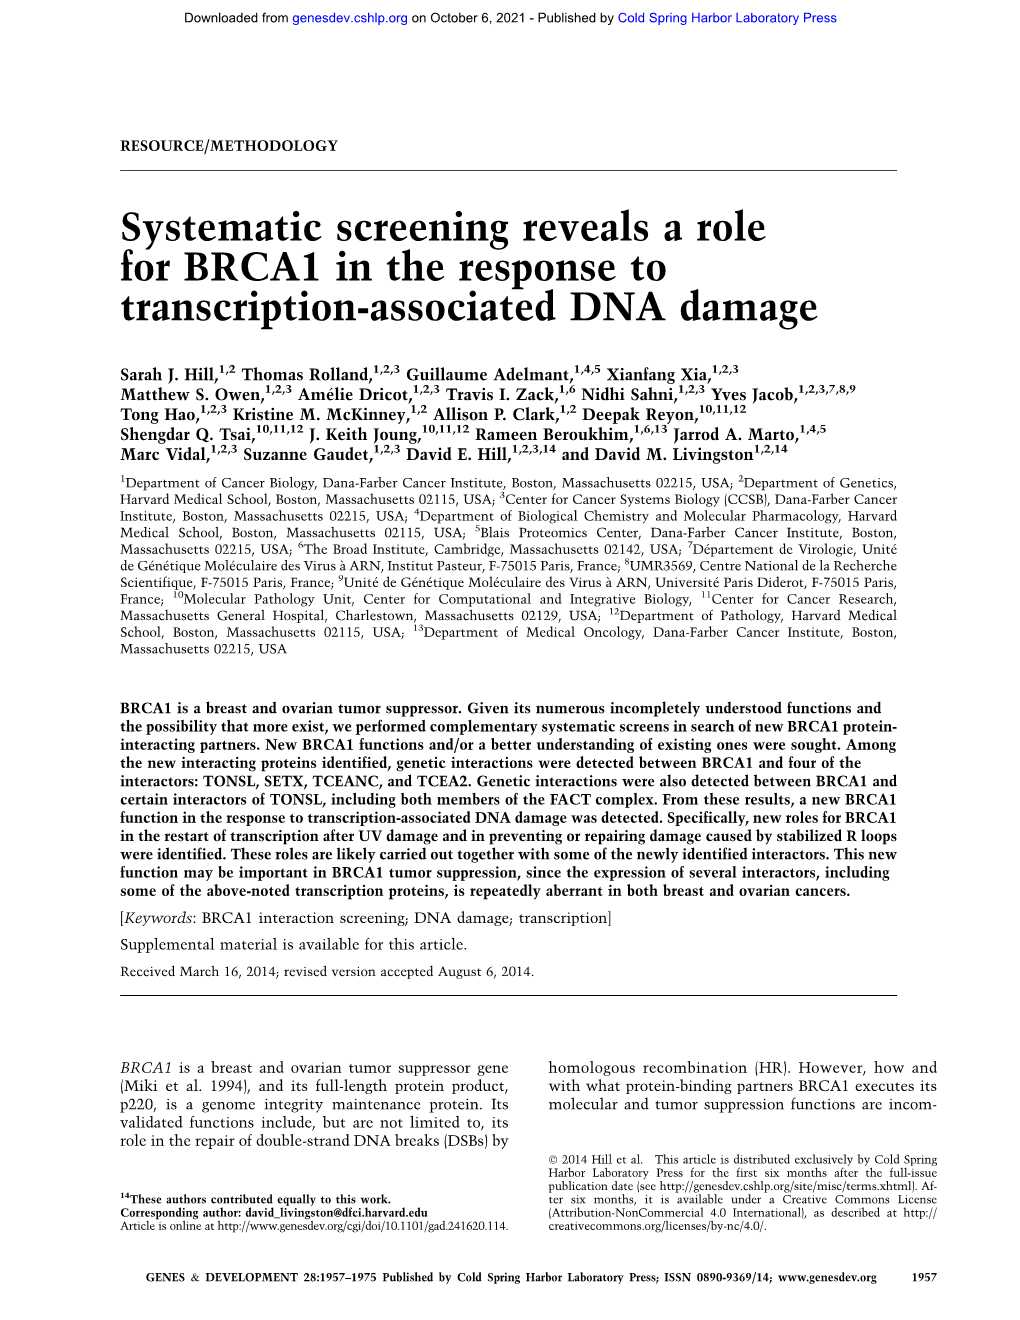 Systematic Screening Reveals a Role for BRCA1 in the Response to Transcription-Associated DNA Damage